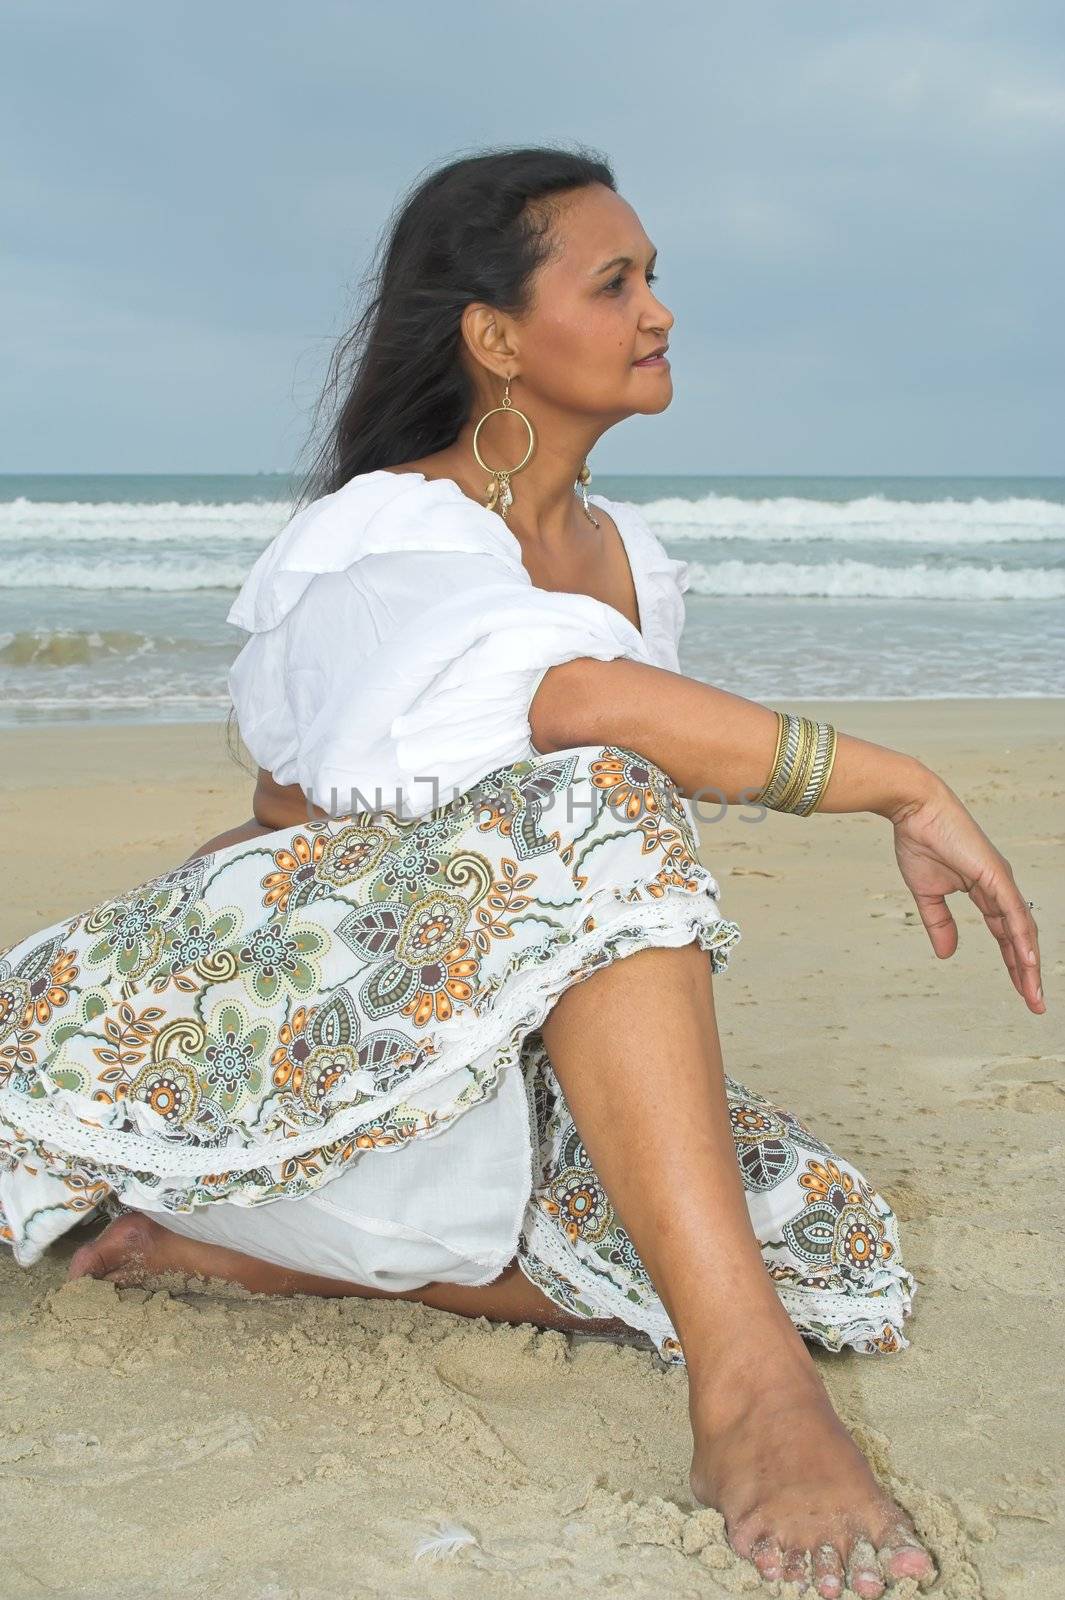 An American Indian woan relaxing at the beach